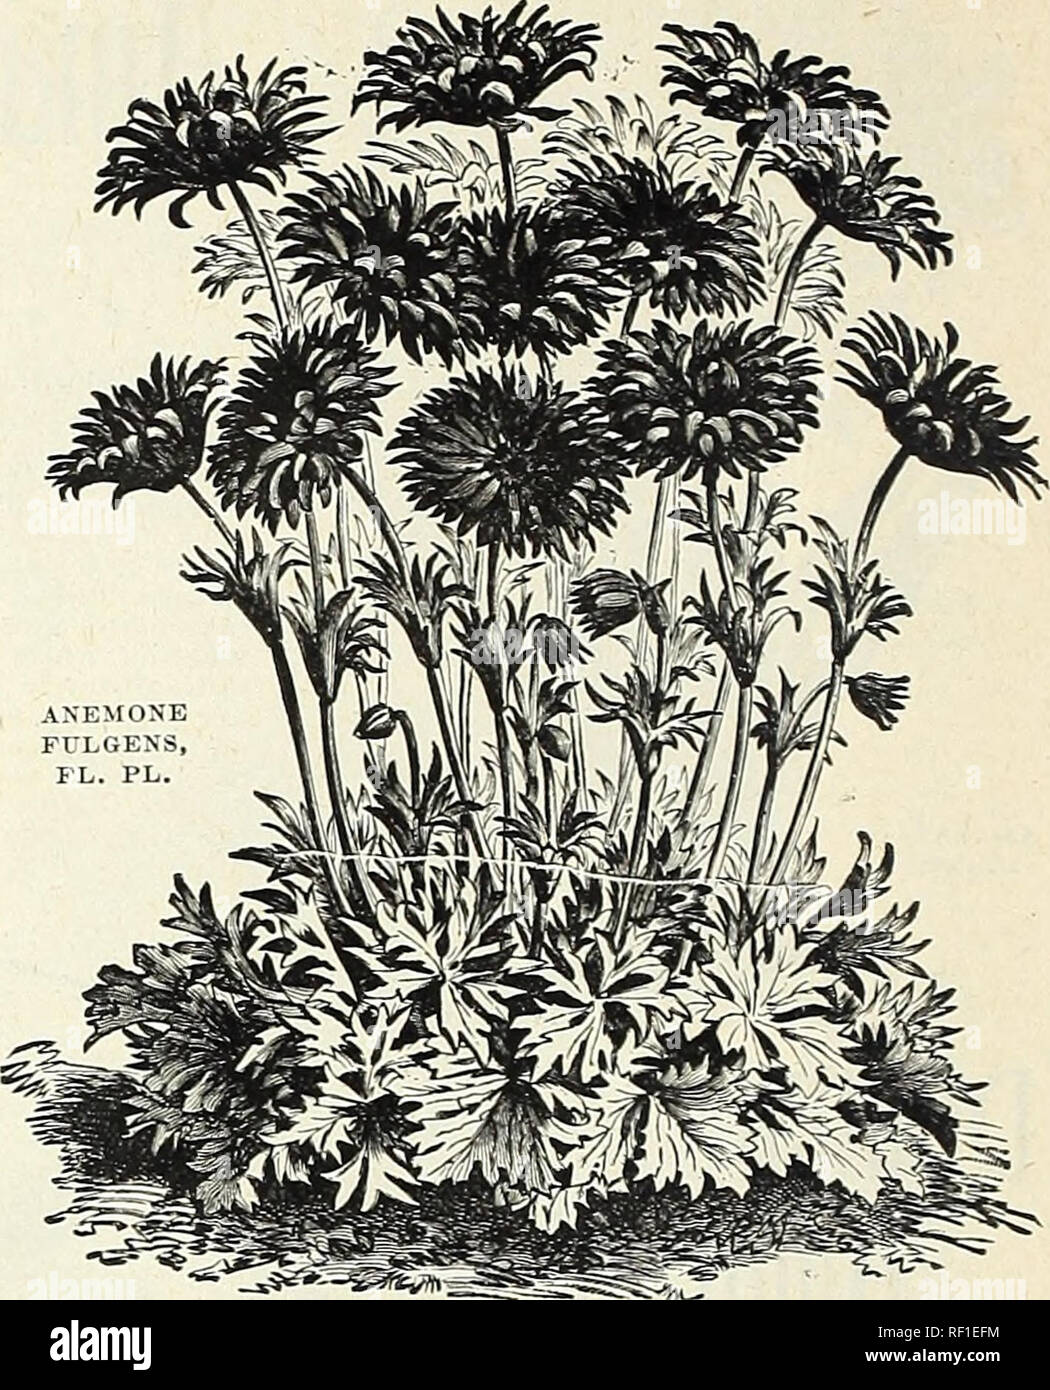 . Catalogue of autumn bulbs : 1898. Seed industry and trade Catalogs; Vegetables Seeds Catalogs; Flowers Seeds Catalogs; Grasses Seeds Catalogs; Bulbs (Plants) Seeds Catalogs. SINGLE POPPY-FLOWERED ANEMONE. BABIANA. A charming genus, with leaves of the darkest ;green, thickly covered with downy hairs, and bearing showy spikes of flowers, characterized &quot;by their rich self-colors, or the striking con- trast of very distinct hues in the same flower. They vary in color from the richest carmine to the brightest blue, many of them being sweet- scented. As they are not hardy north of Washington, Stock Photo